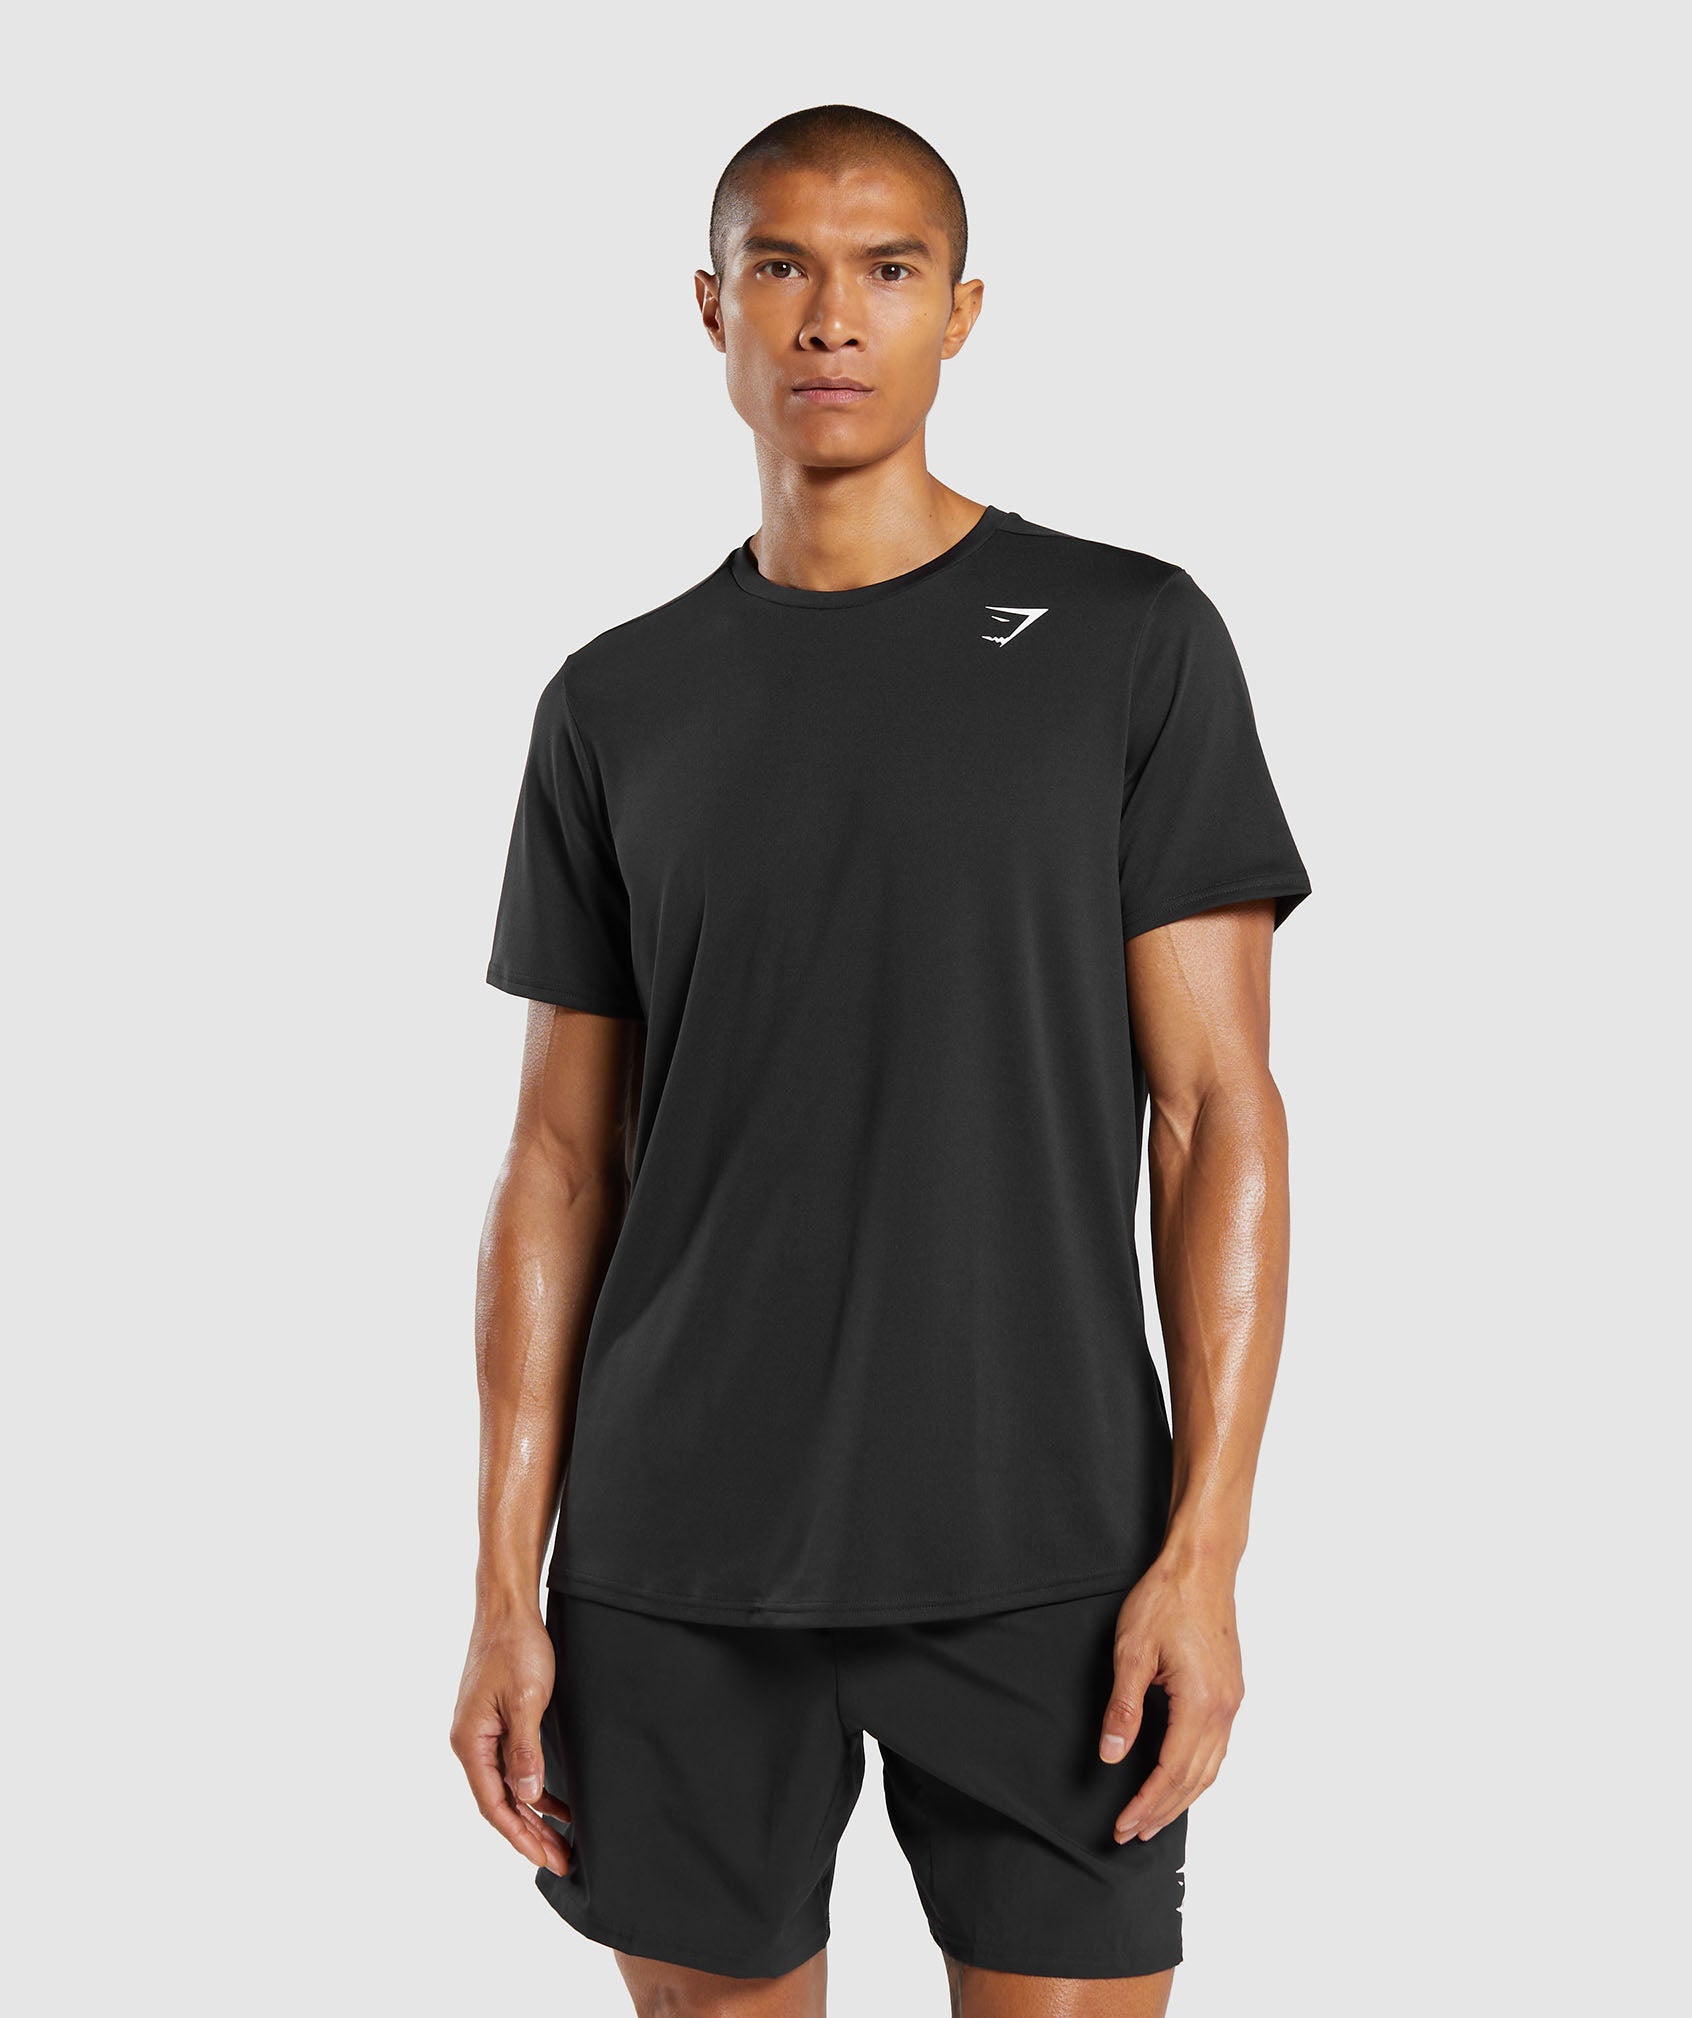 Arrival T-Shirt in Black